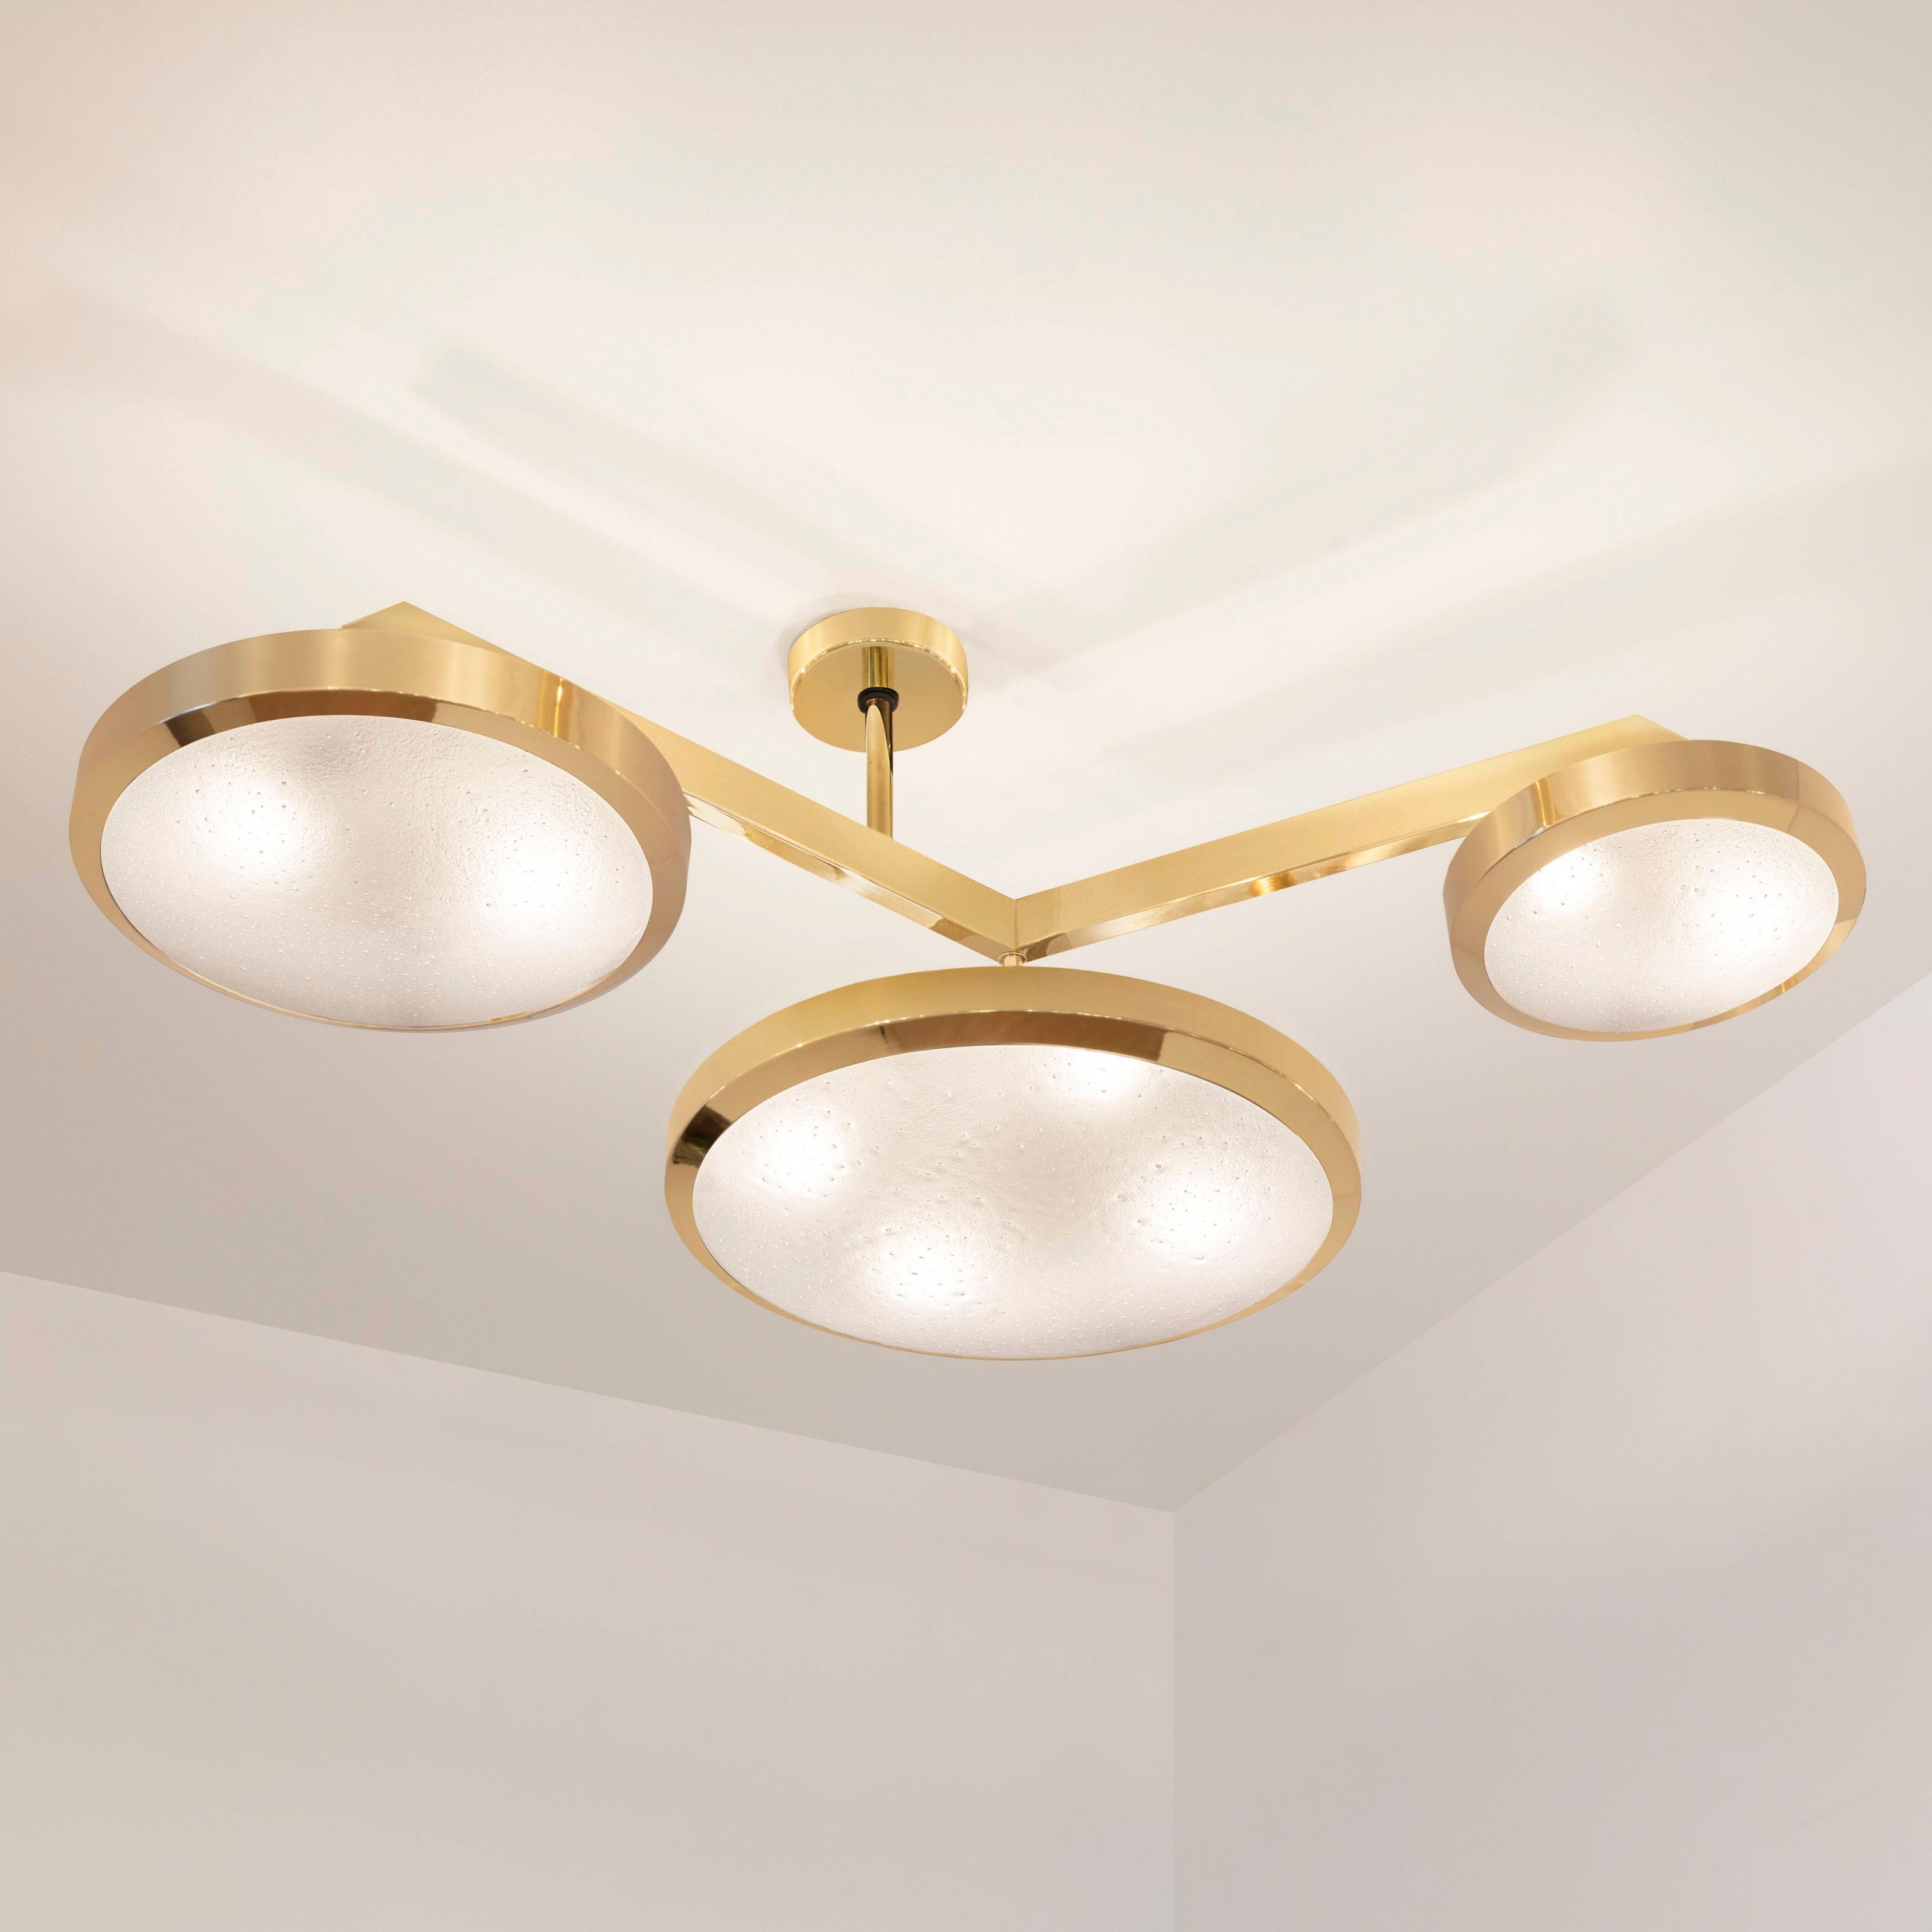 Zeta Ceiling Light by Gaspare Asaro - Polished Nickel Finish In New Condition For Sale In New York, NY